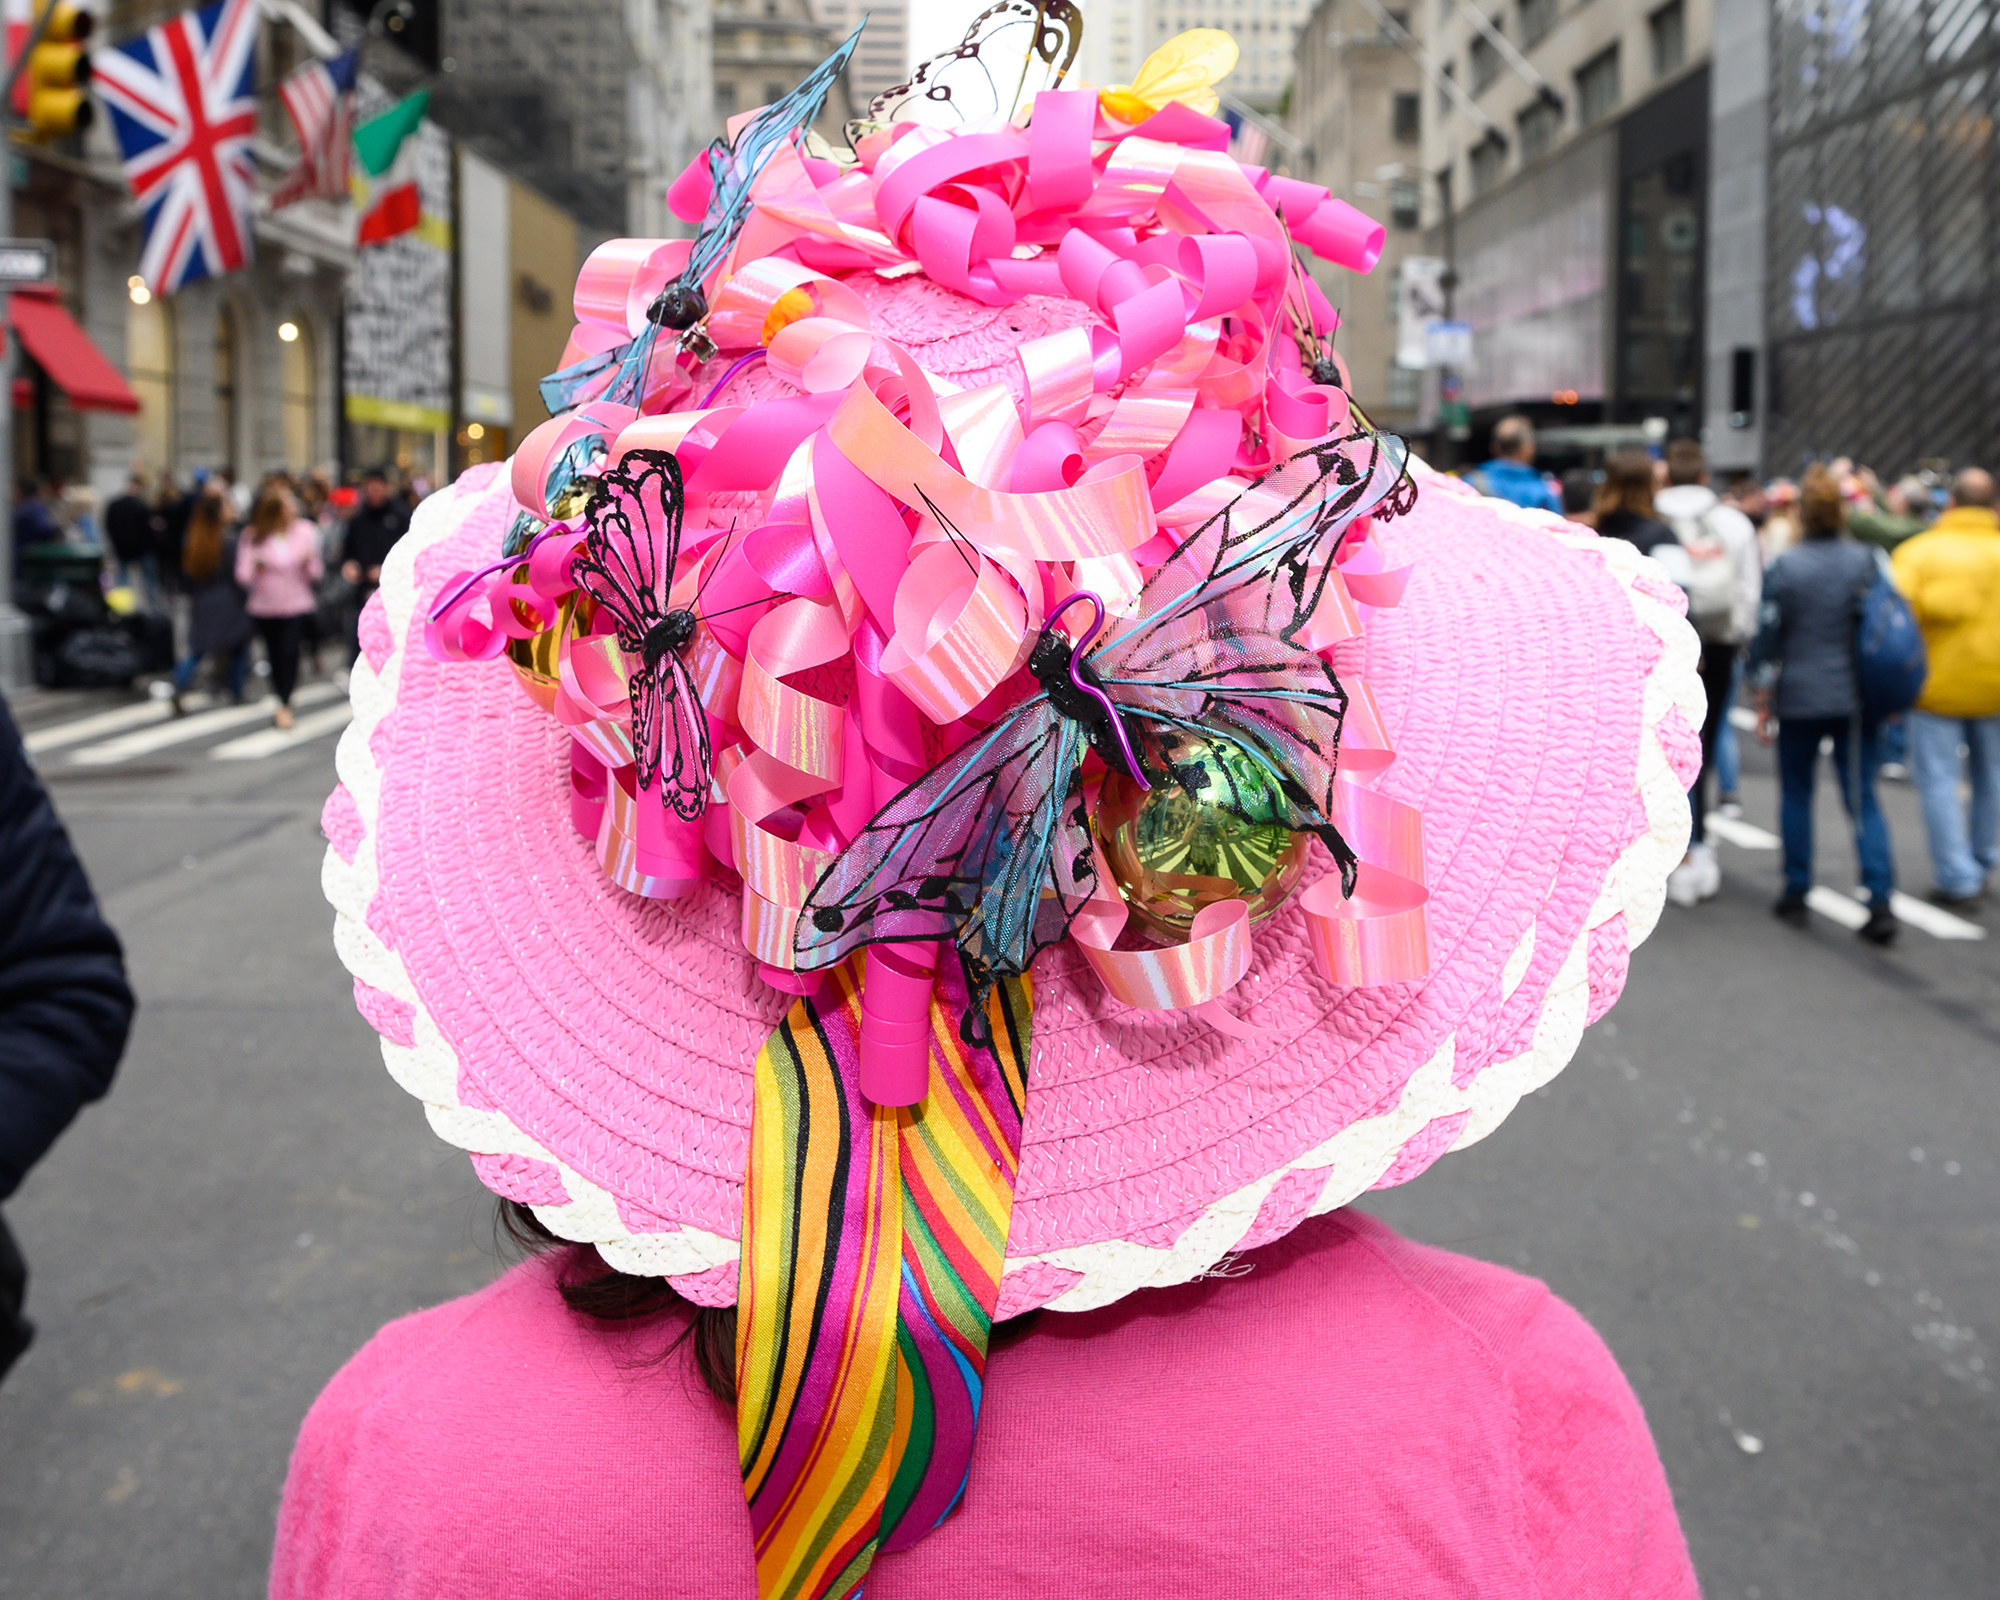 A woman with a large pink hat covered in ribbons